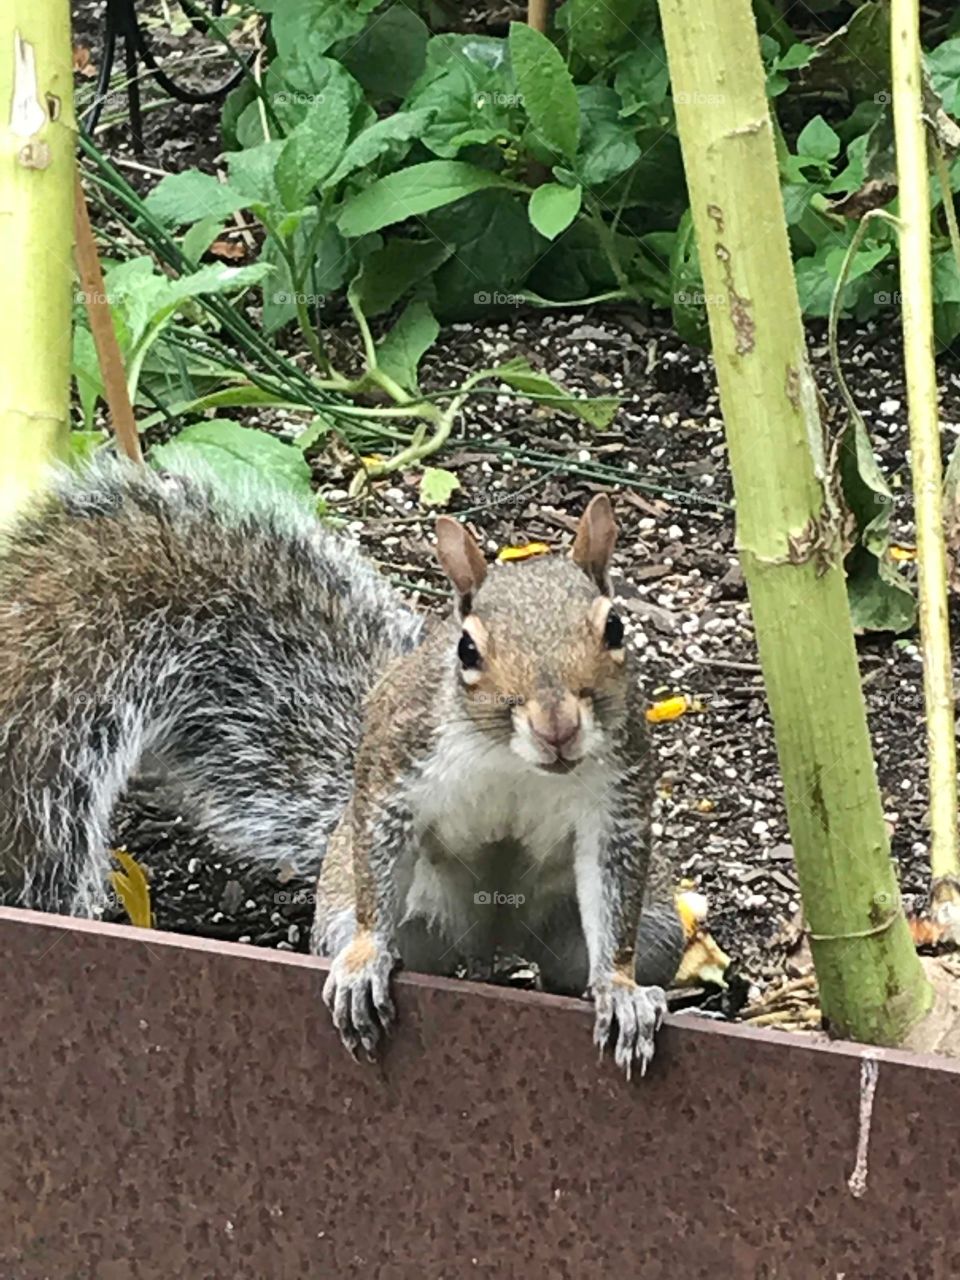 Squirrel is asking for food